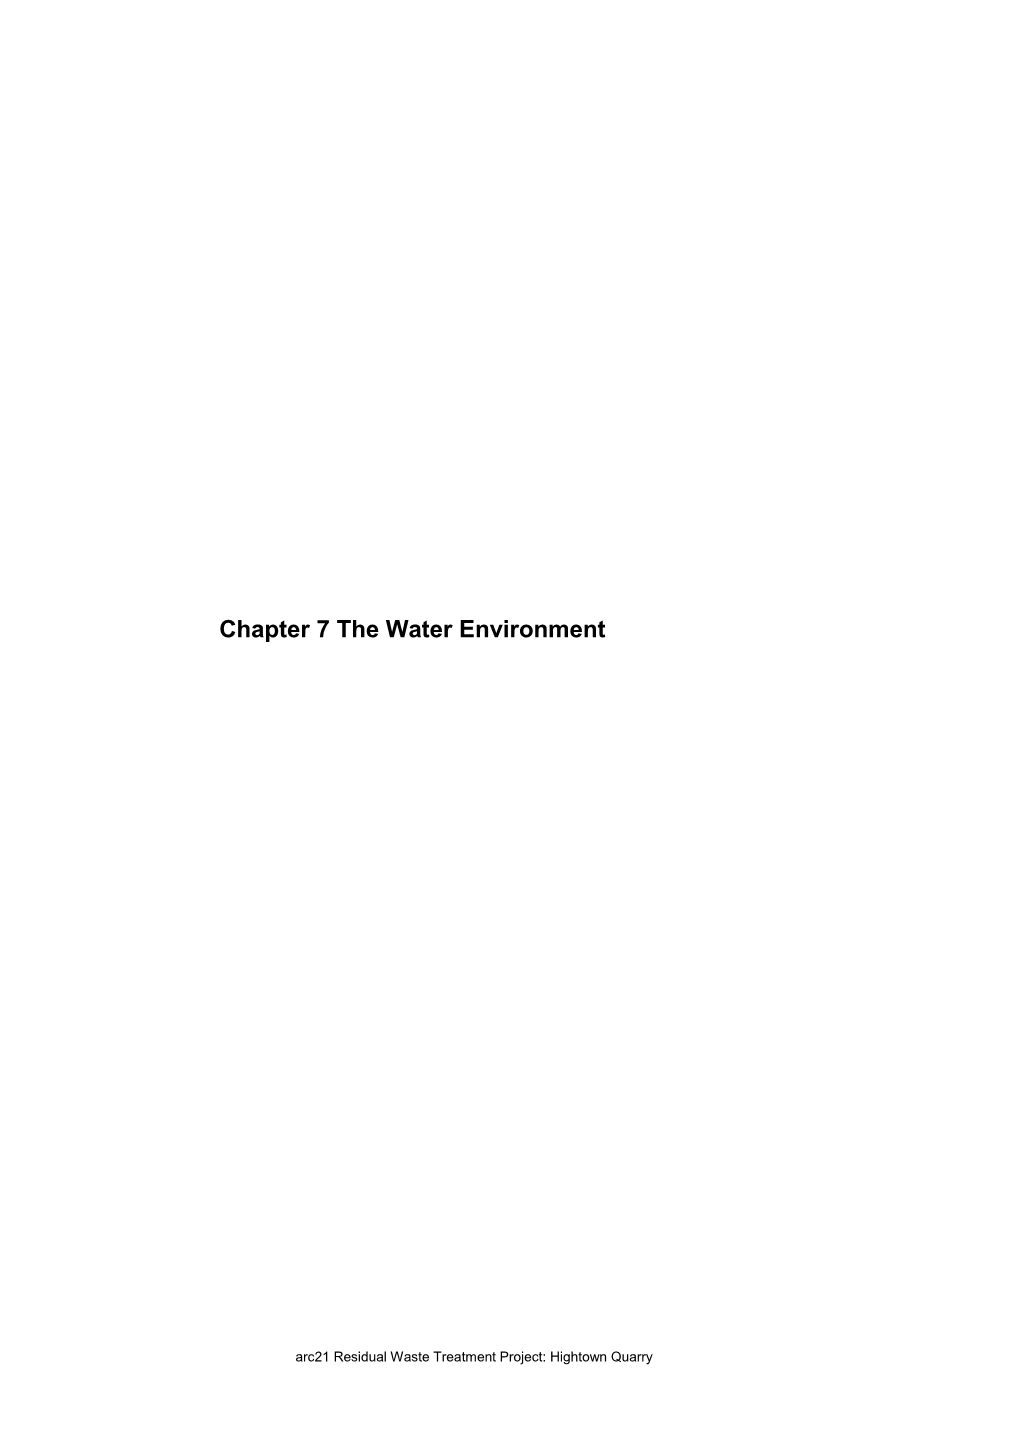 Chapter 7 the Water Environment